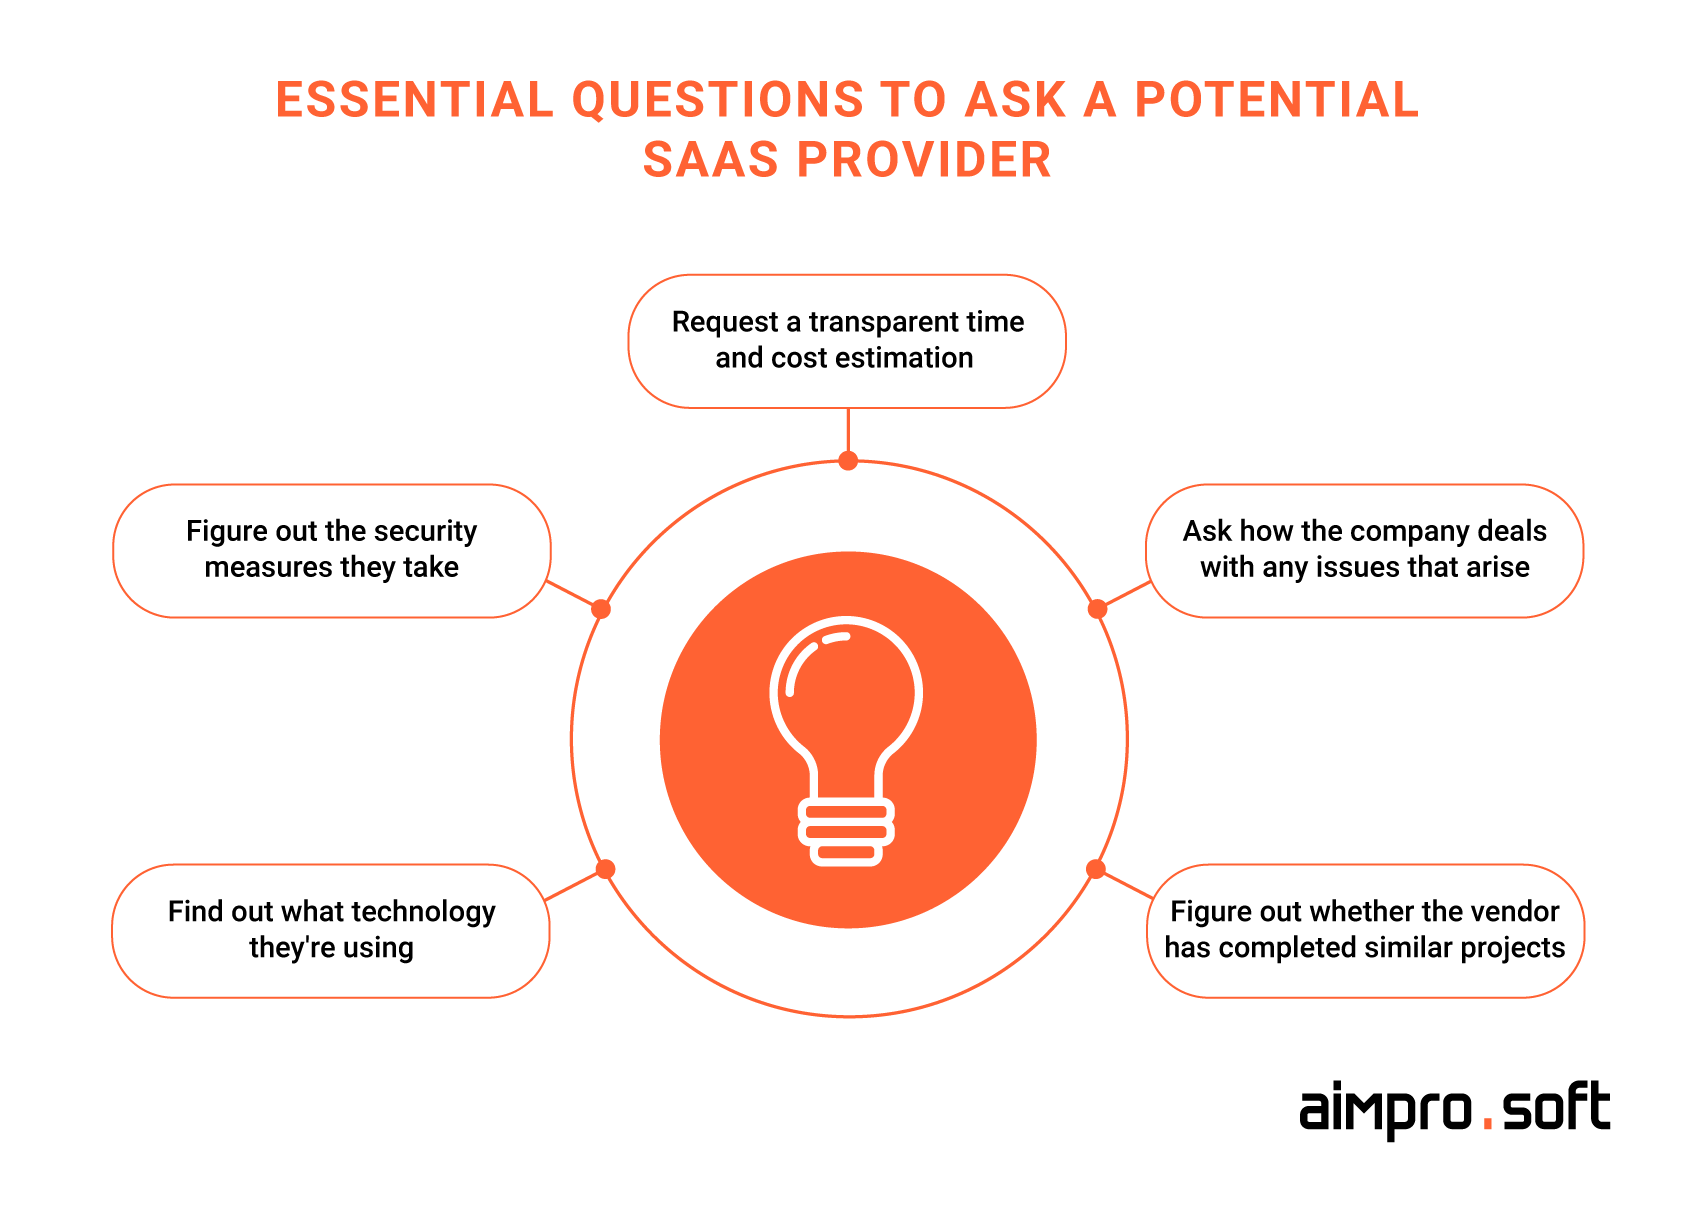 Essential-questions-to-ask-a-potential-SaaS-provide-150x150